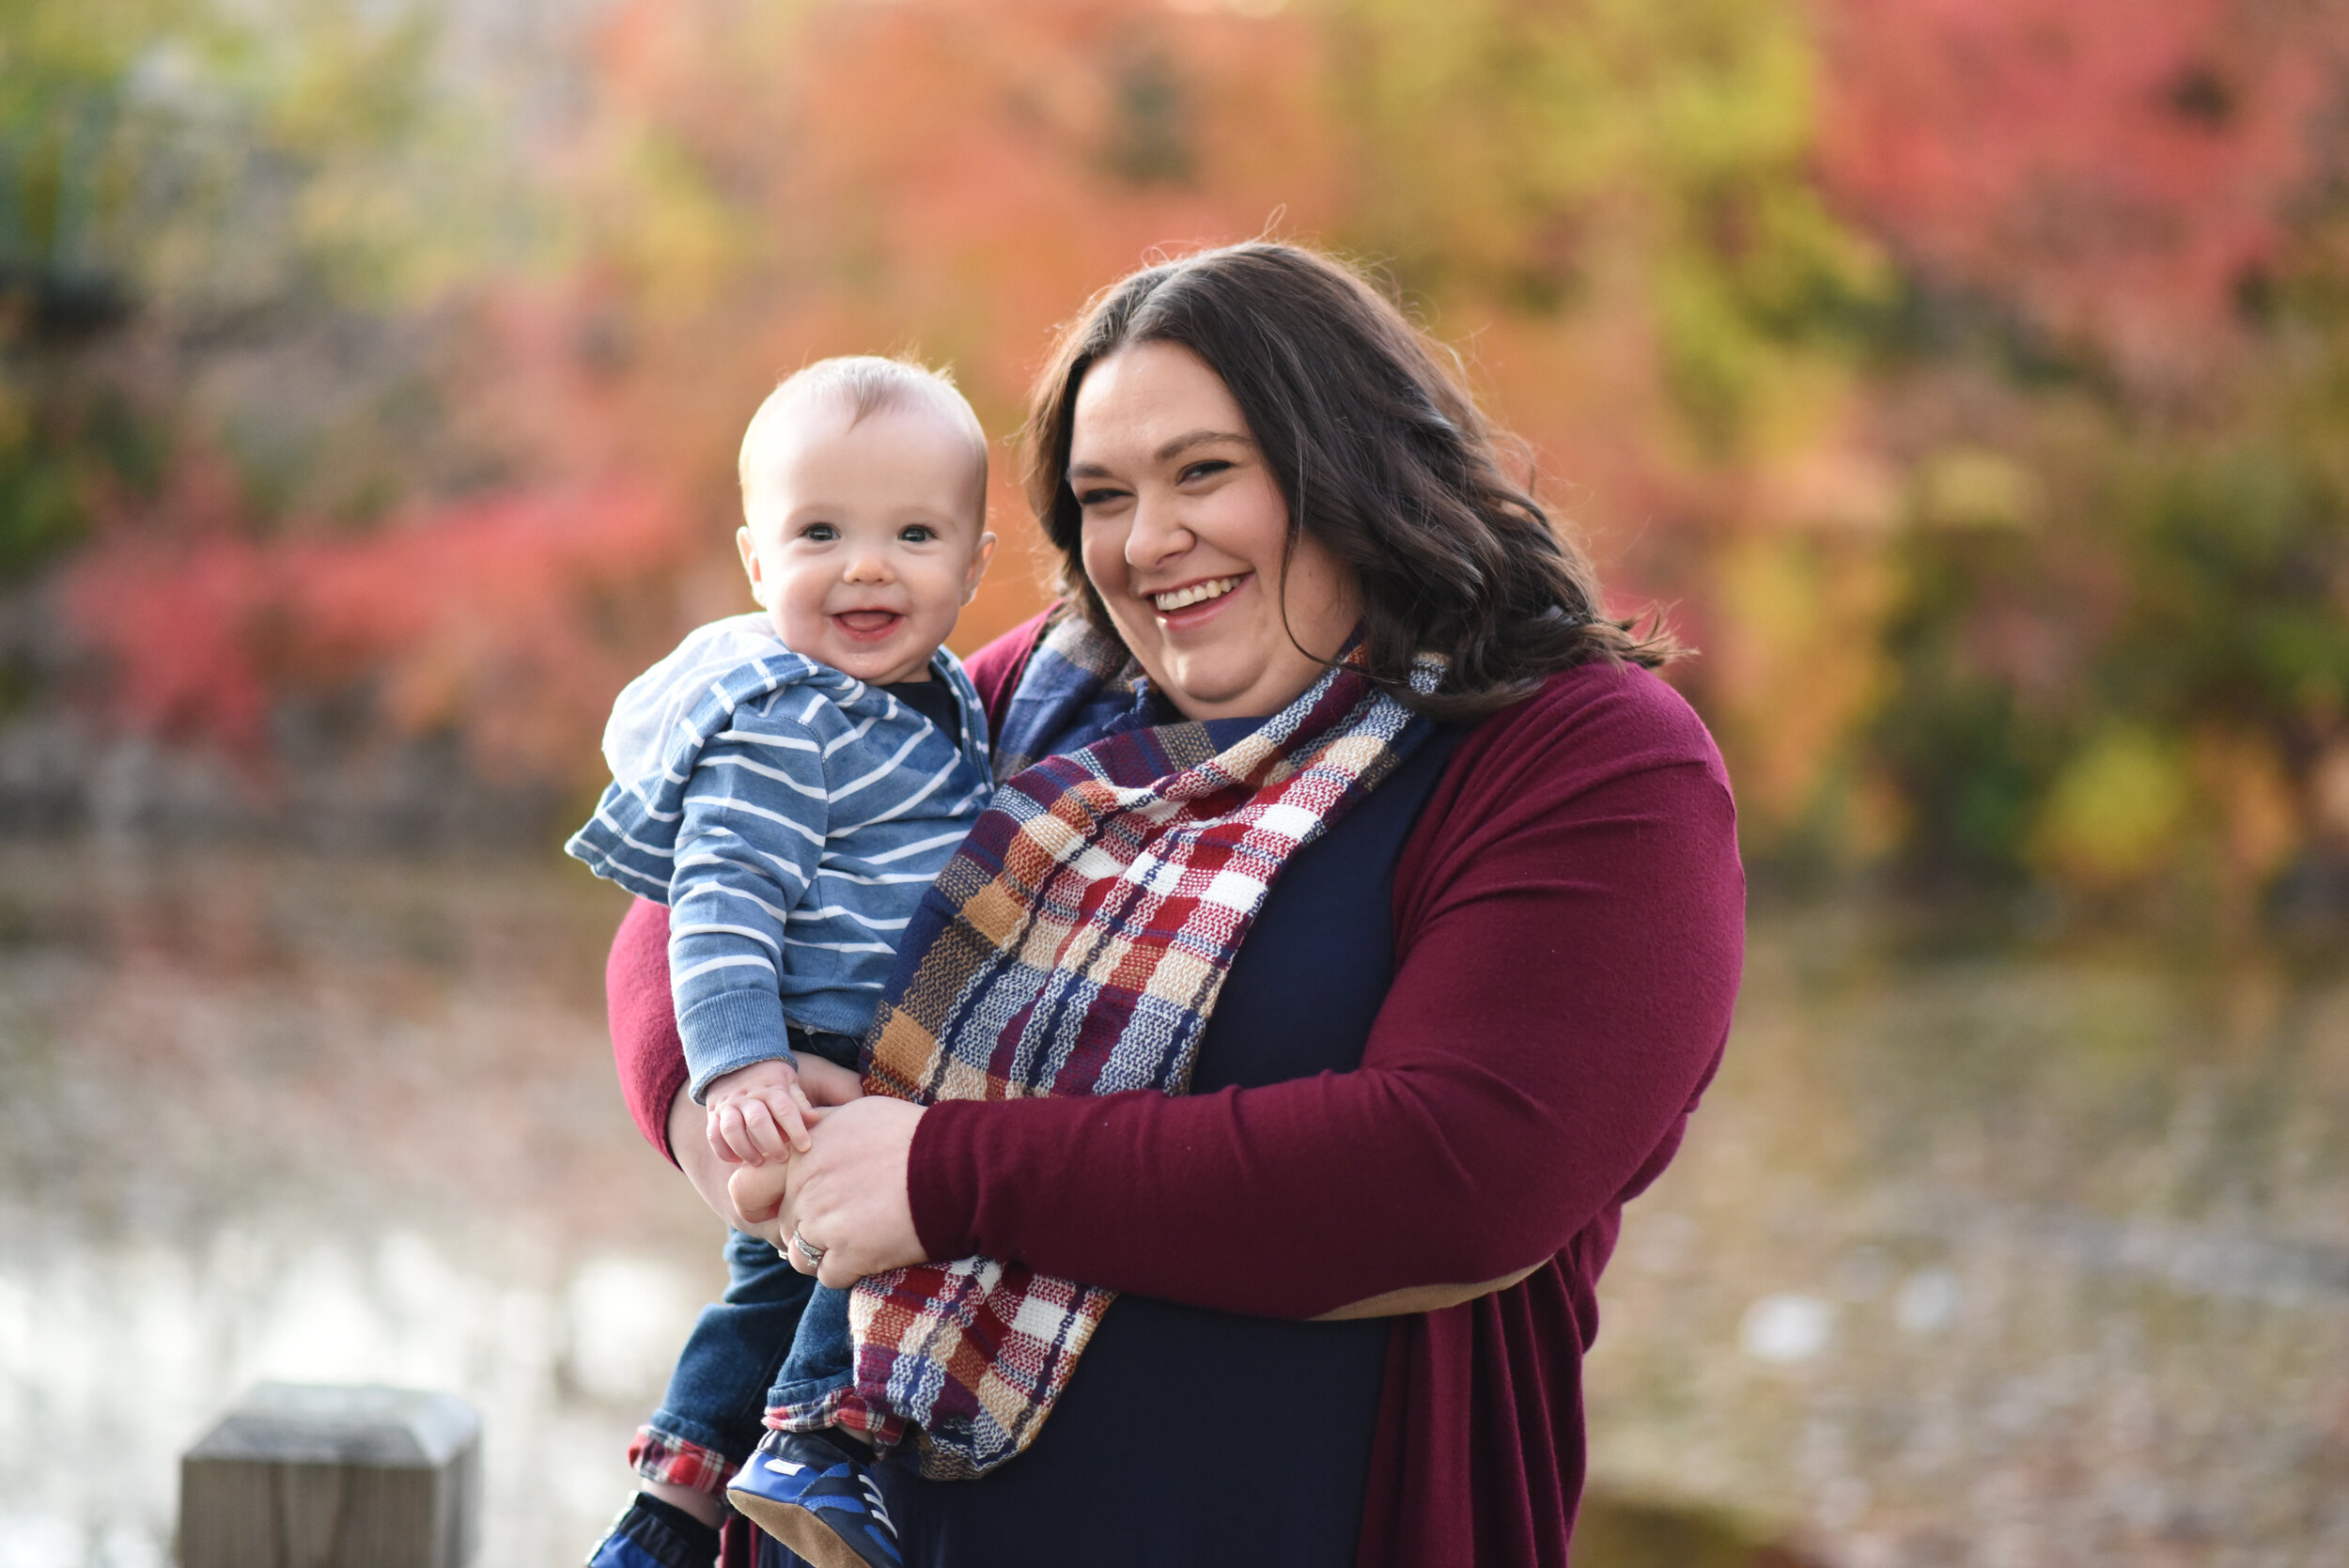 028_Erika Cassidy_Andy Oliver_Family Fall 2018.jpg